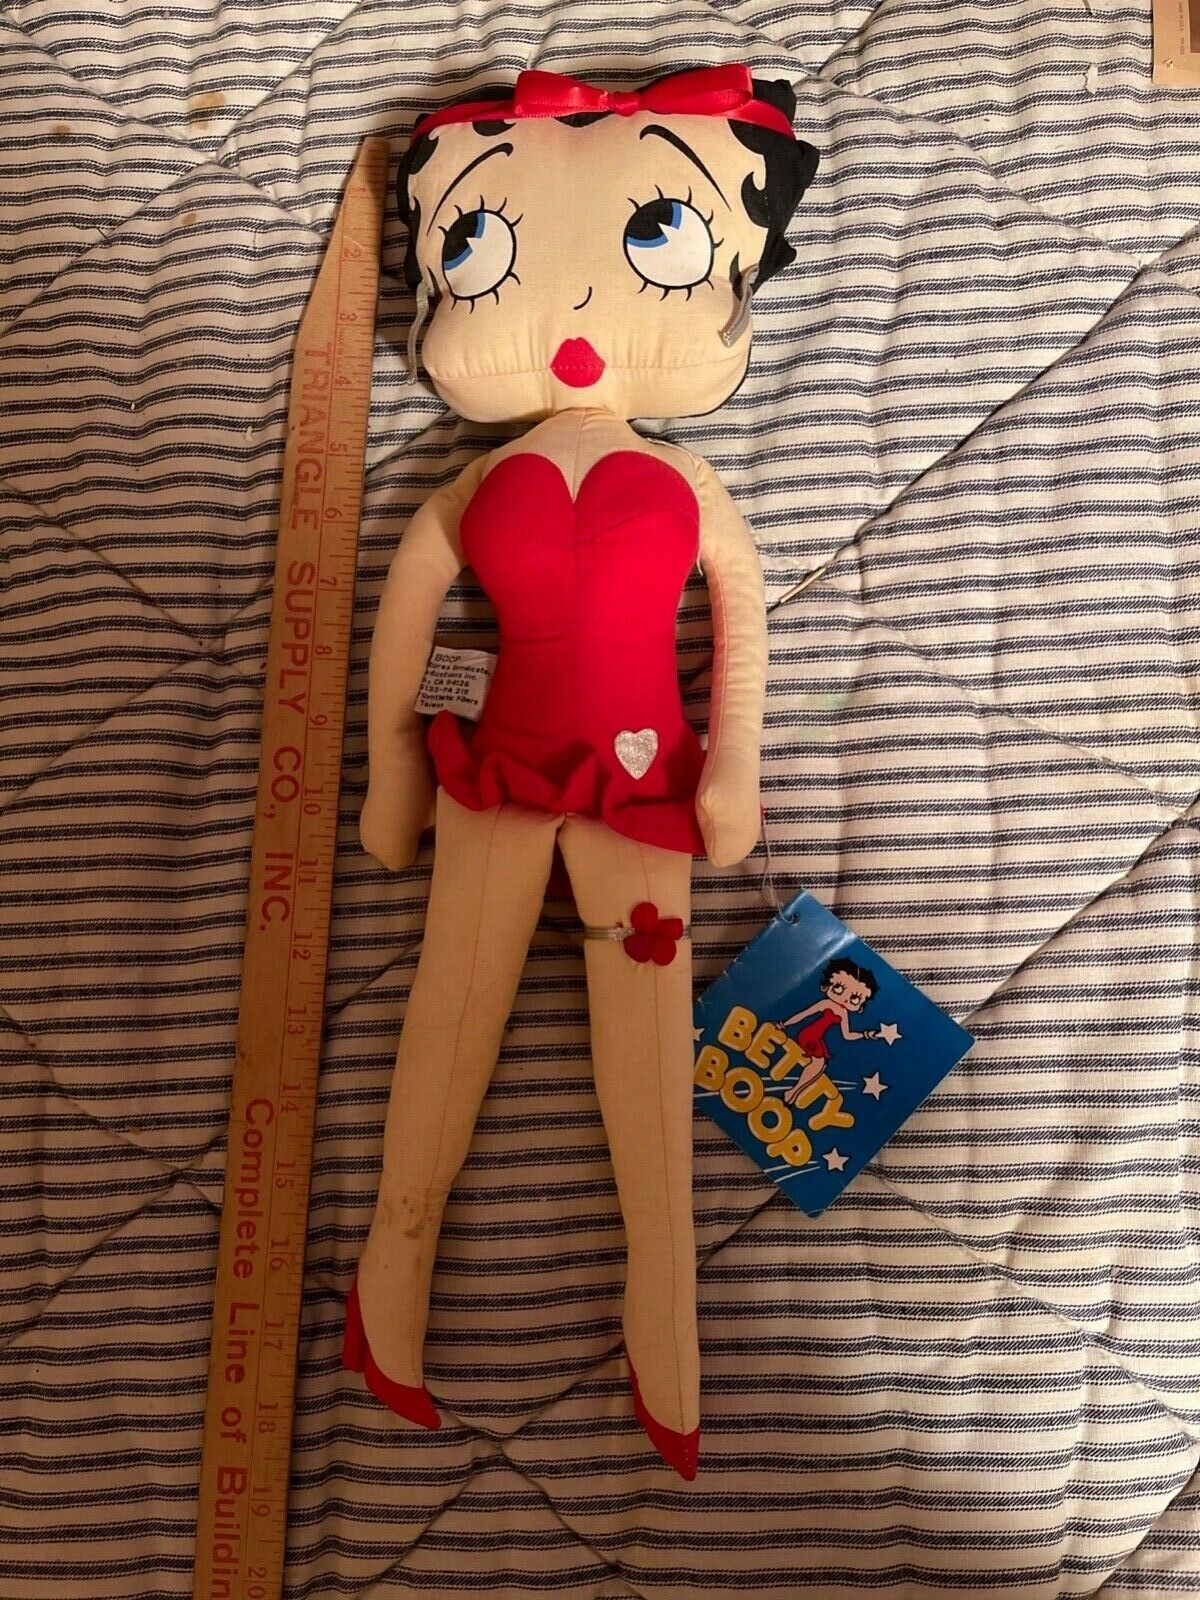 Betty Boop Doll ~ 1983 King Features Syndicate / 18" Tall Stuffed/ Plush